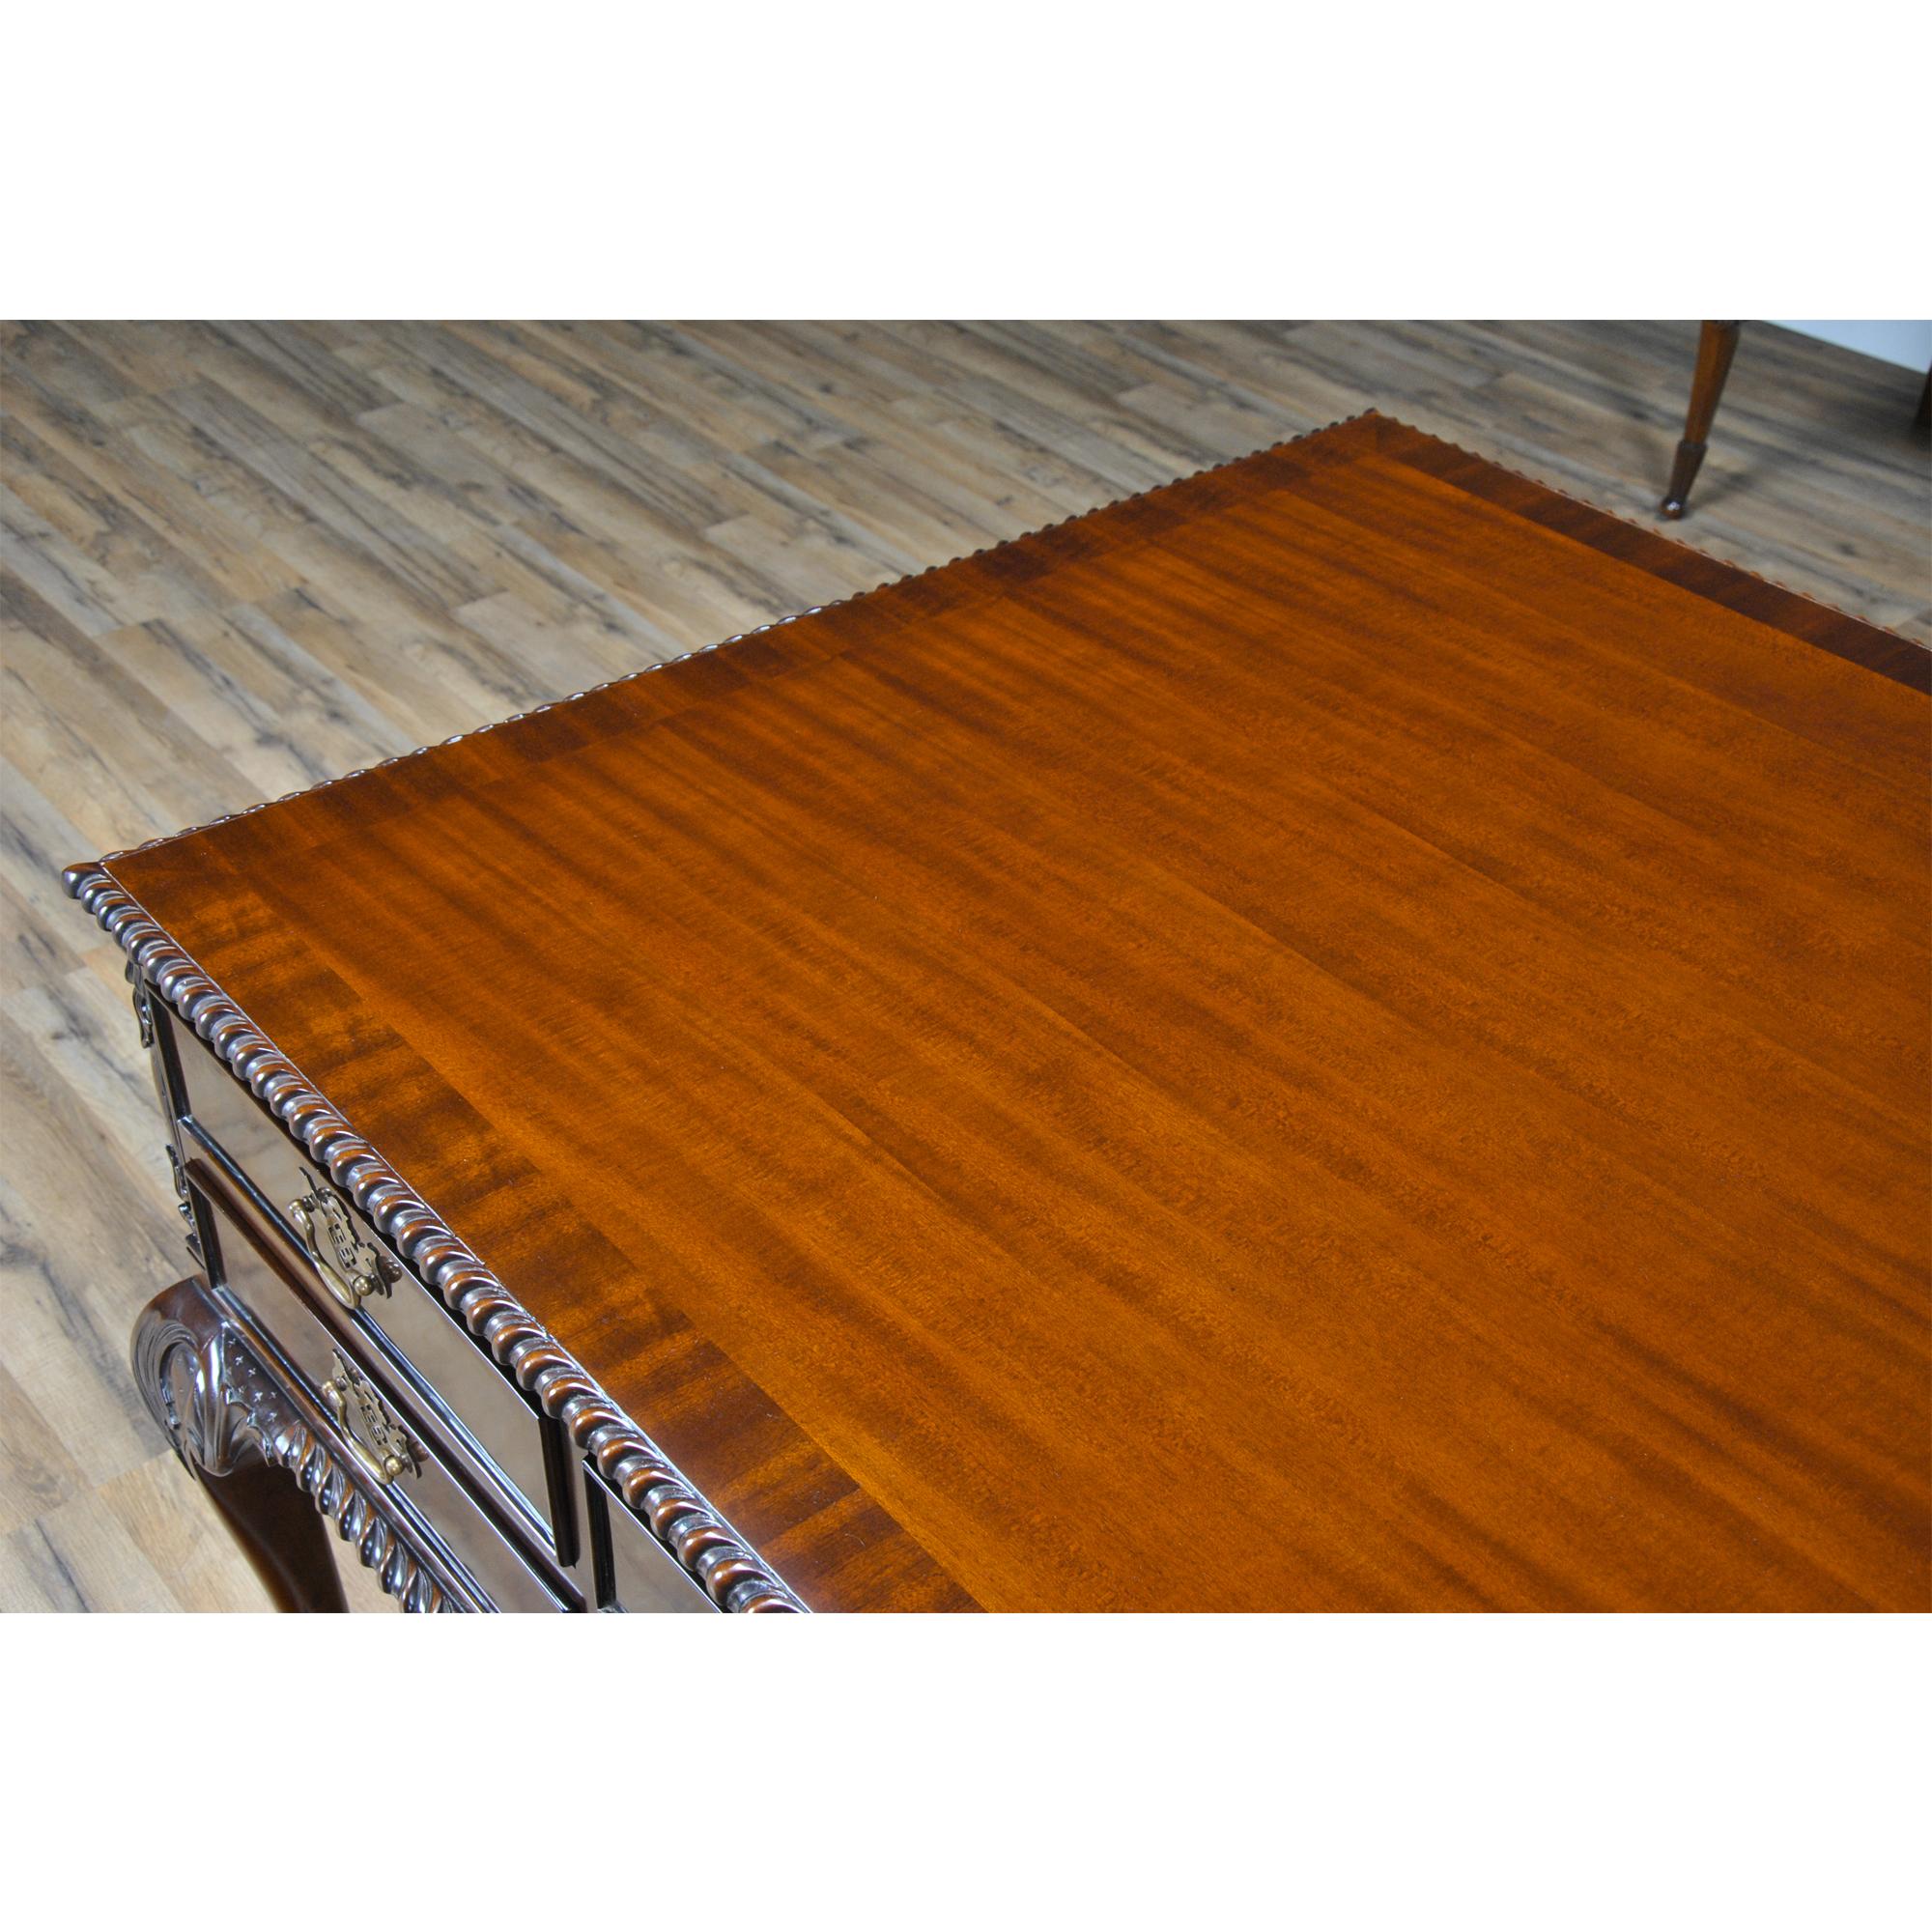 Mahogany Chippendale Partner Desk In New Condition For Sale In Annville, PA